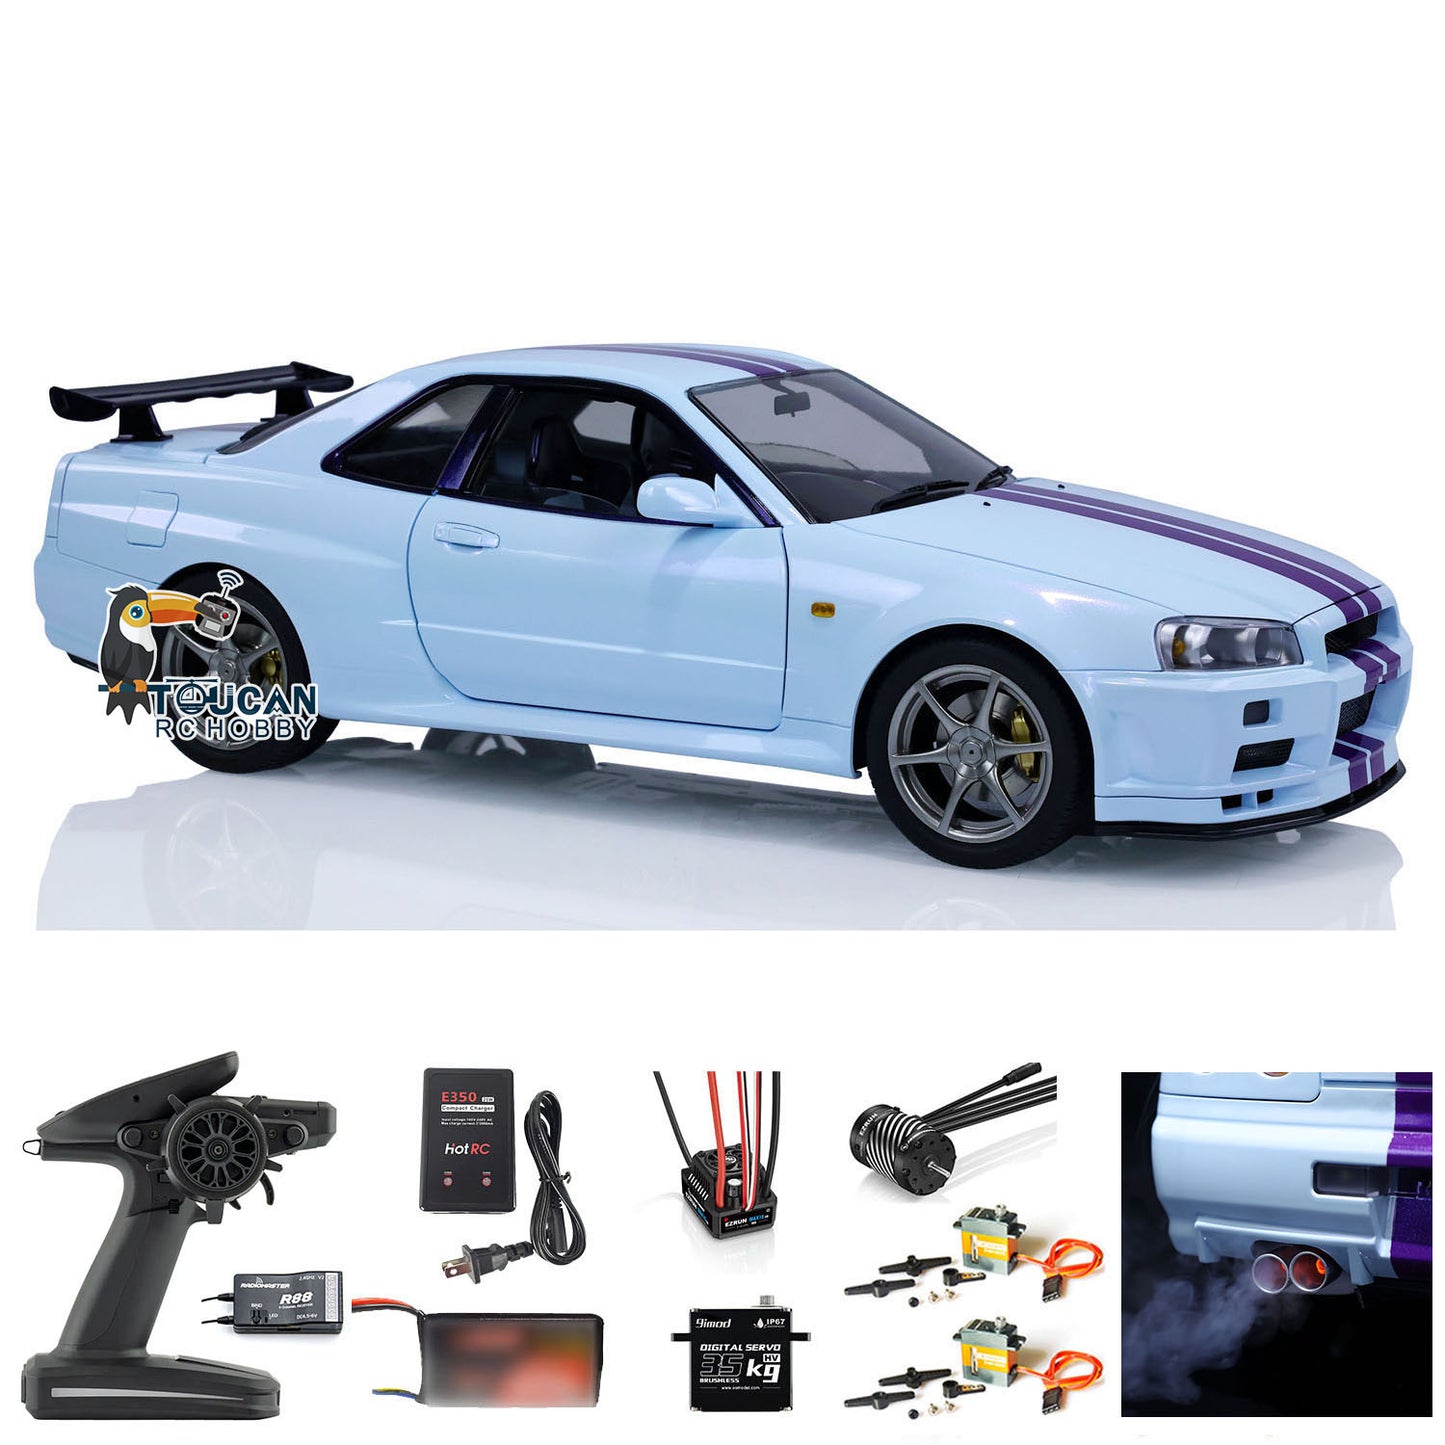 Capo 4WD 1/8 Metal RC Racing Car R34 4x4 High Speed RTR Remote Controlled Drift Vehicles Sound Smoking RTR Upgraded Version